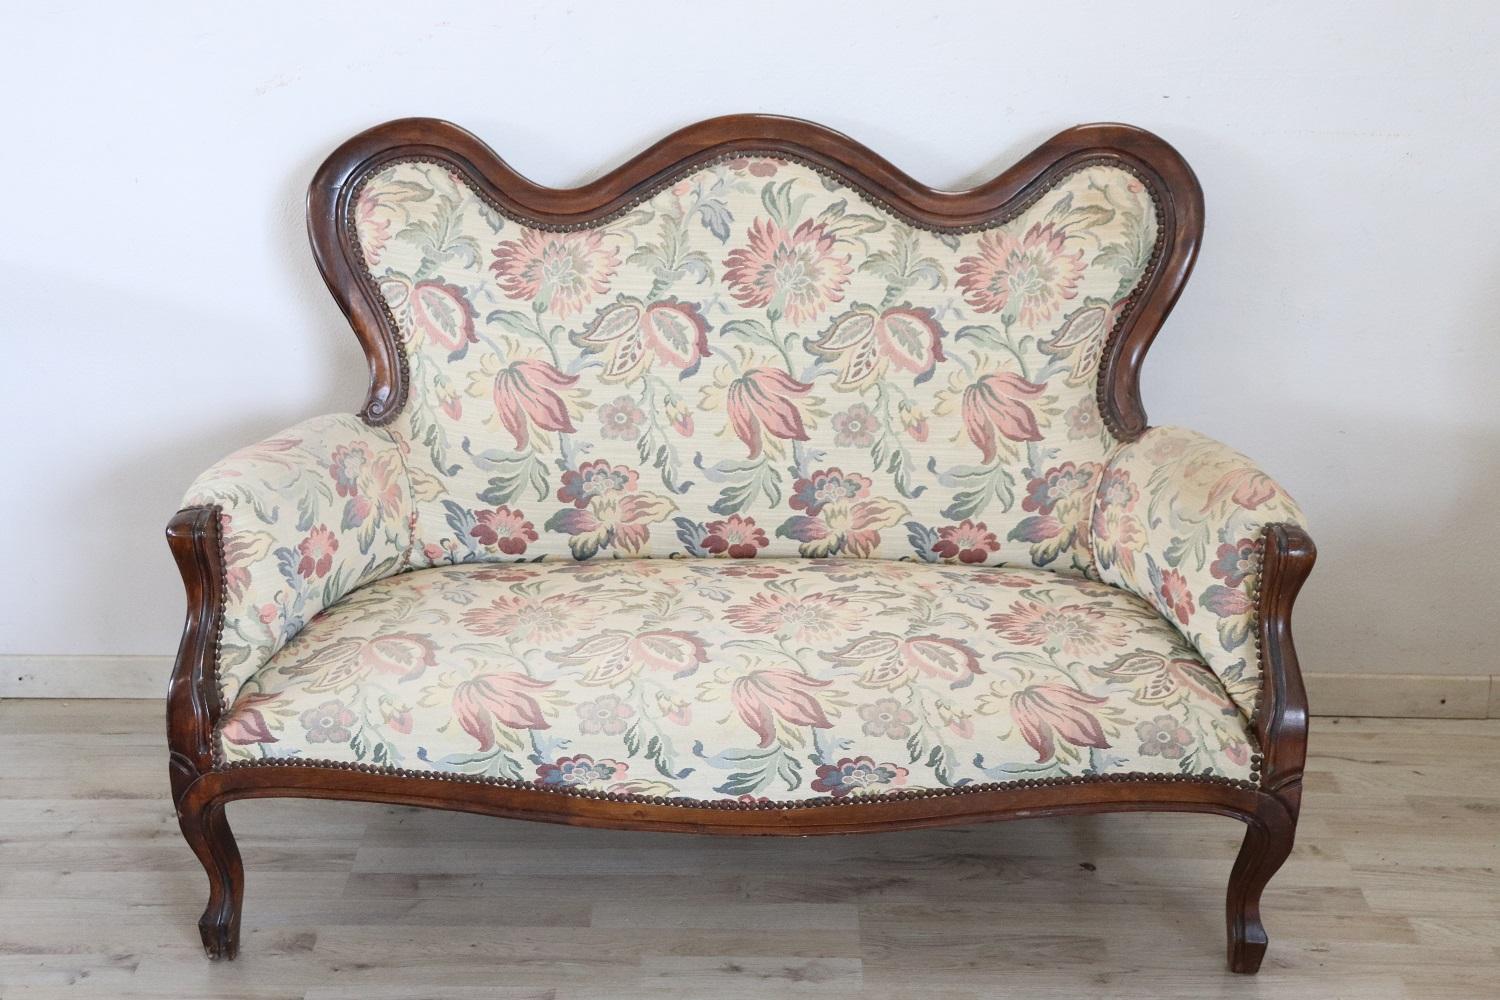 Rare complete Italian luxury Louis Philippe style 1930s living room set includes:
1 sofa
1 armchair

Refined living room set in walnut wood. The living room comes from an important Italian villa and embellished the room for relaxation and